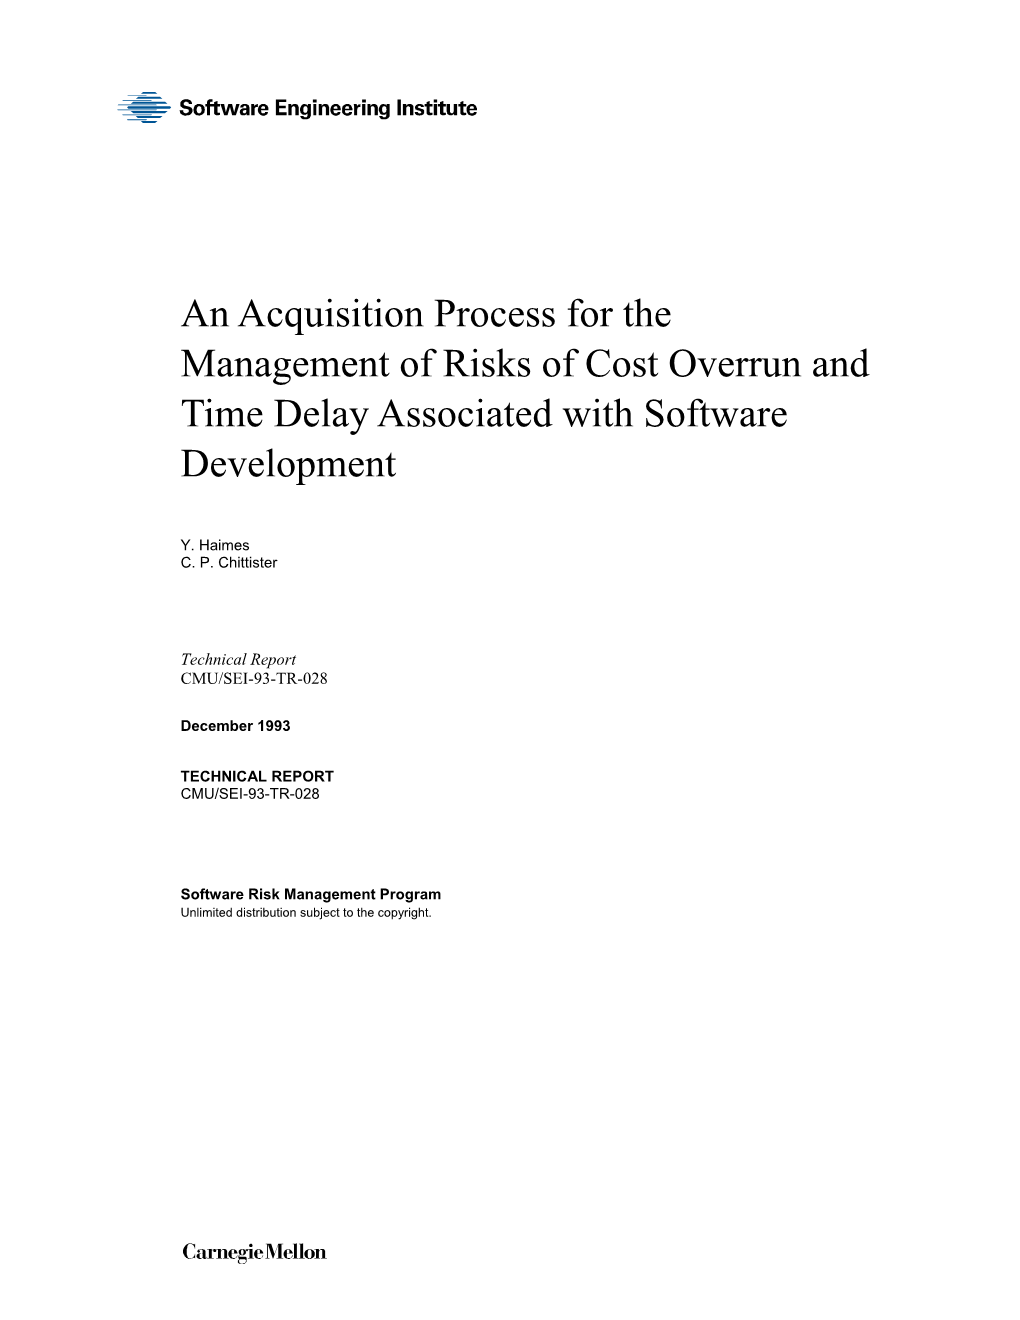 An Acquisition Process for the Management of Risks of Cost Overrun and Time Delay Associated with Software Development